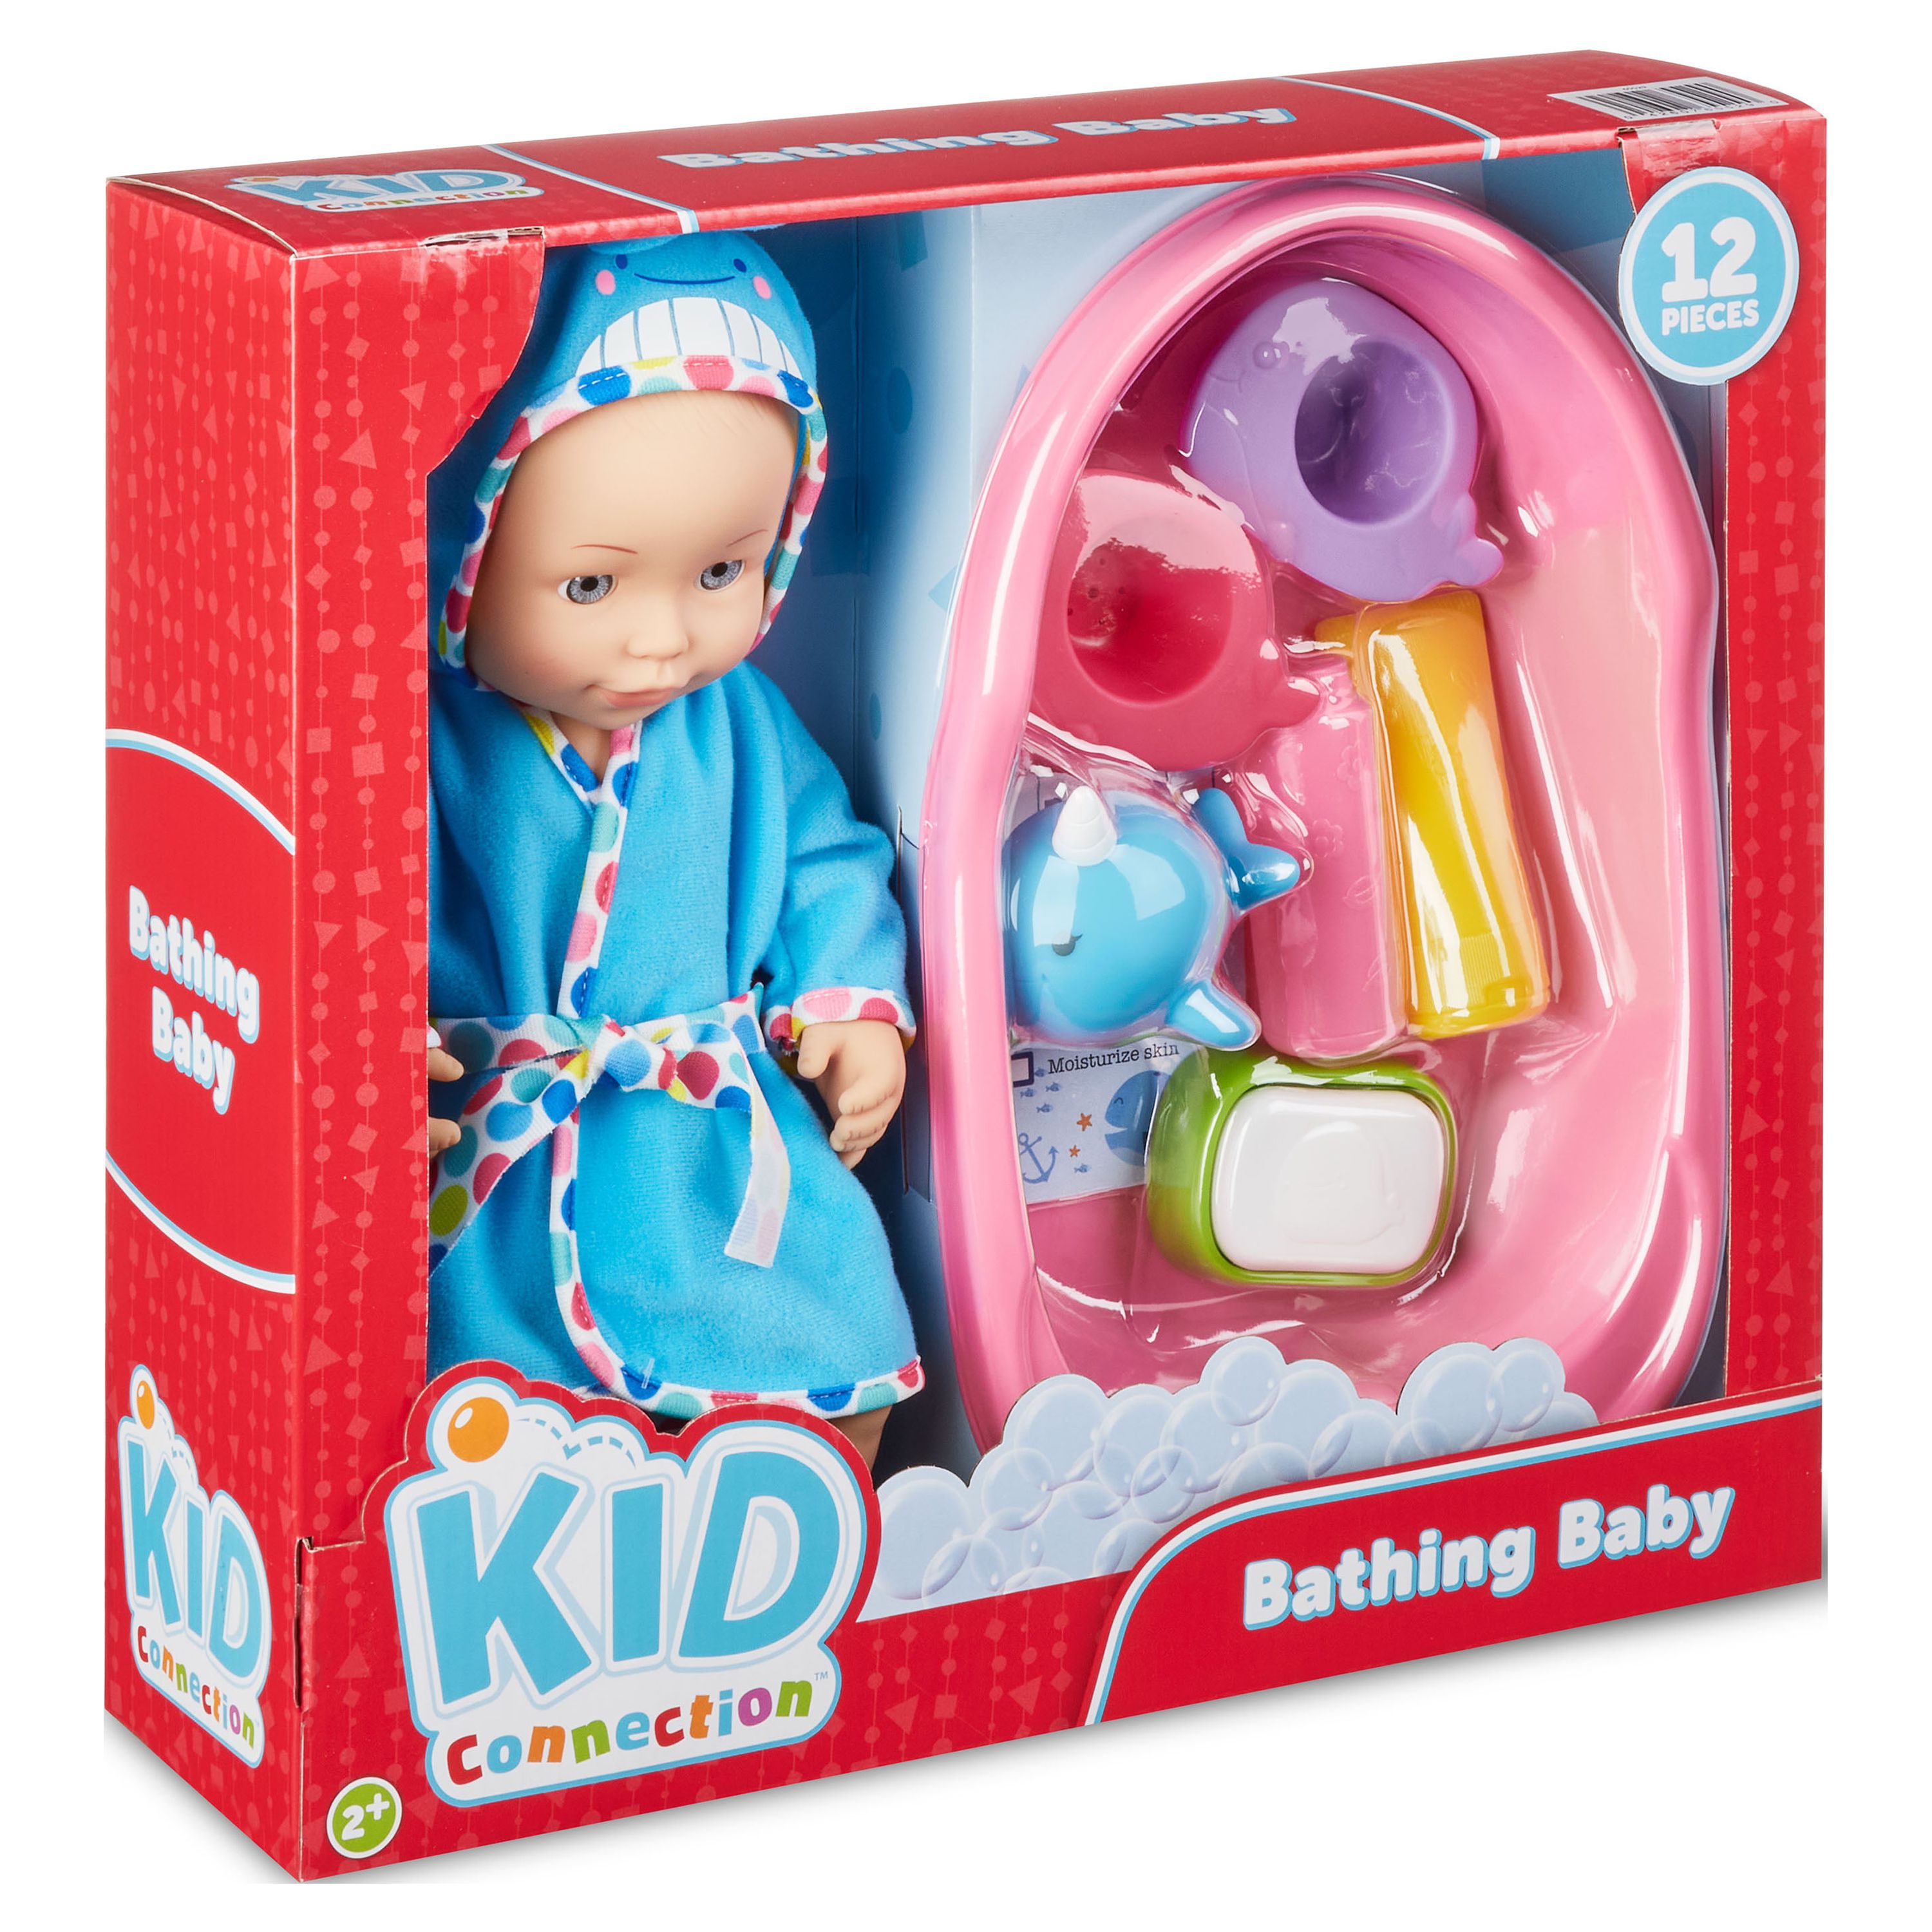 Kid Connection Bathing Baby Doll Play Set, Light Skin Tone - image 2 of 5